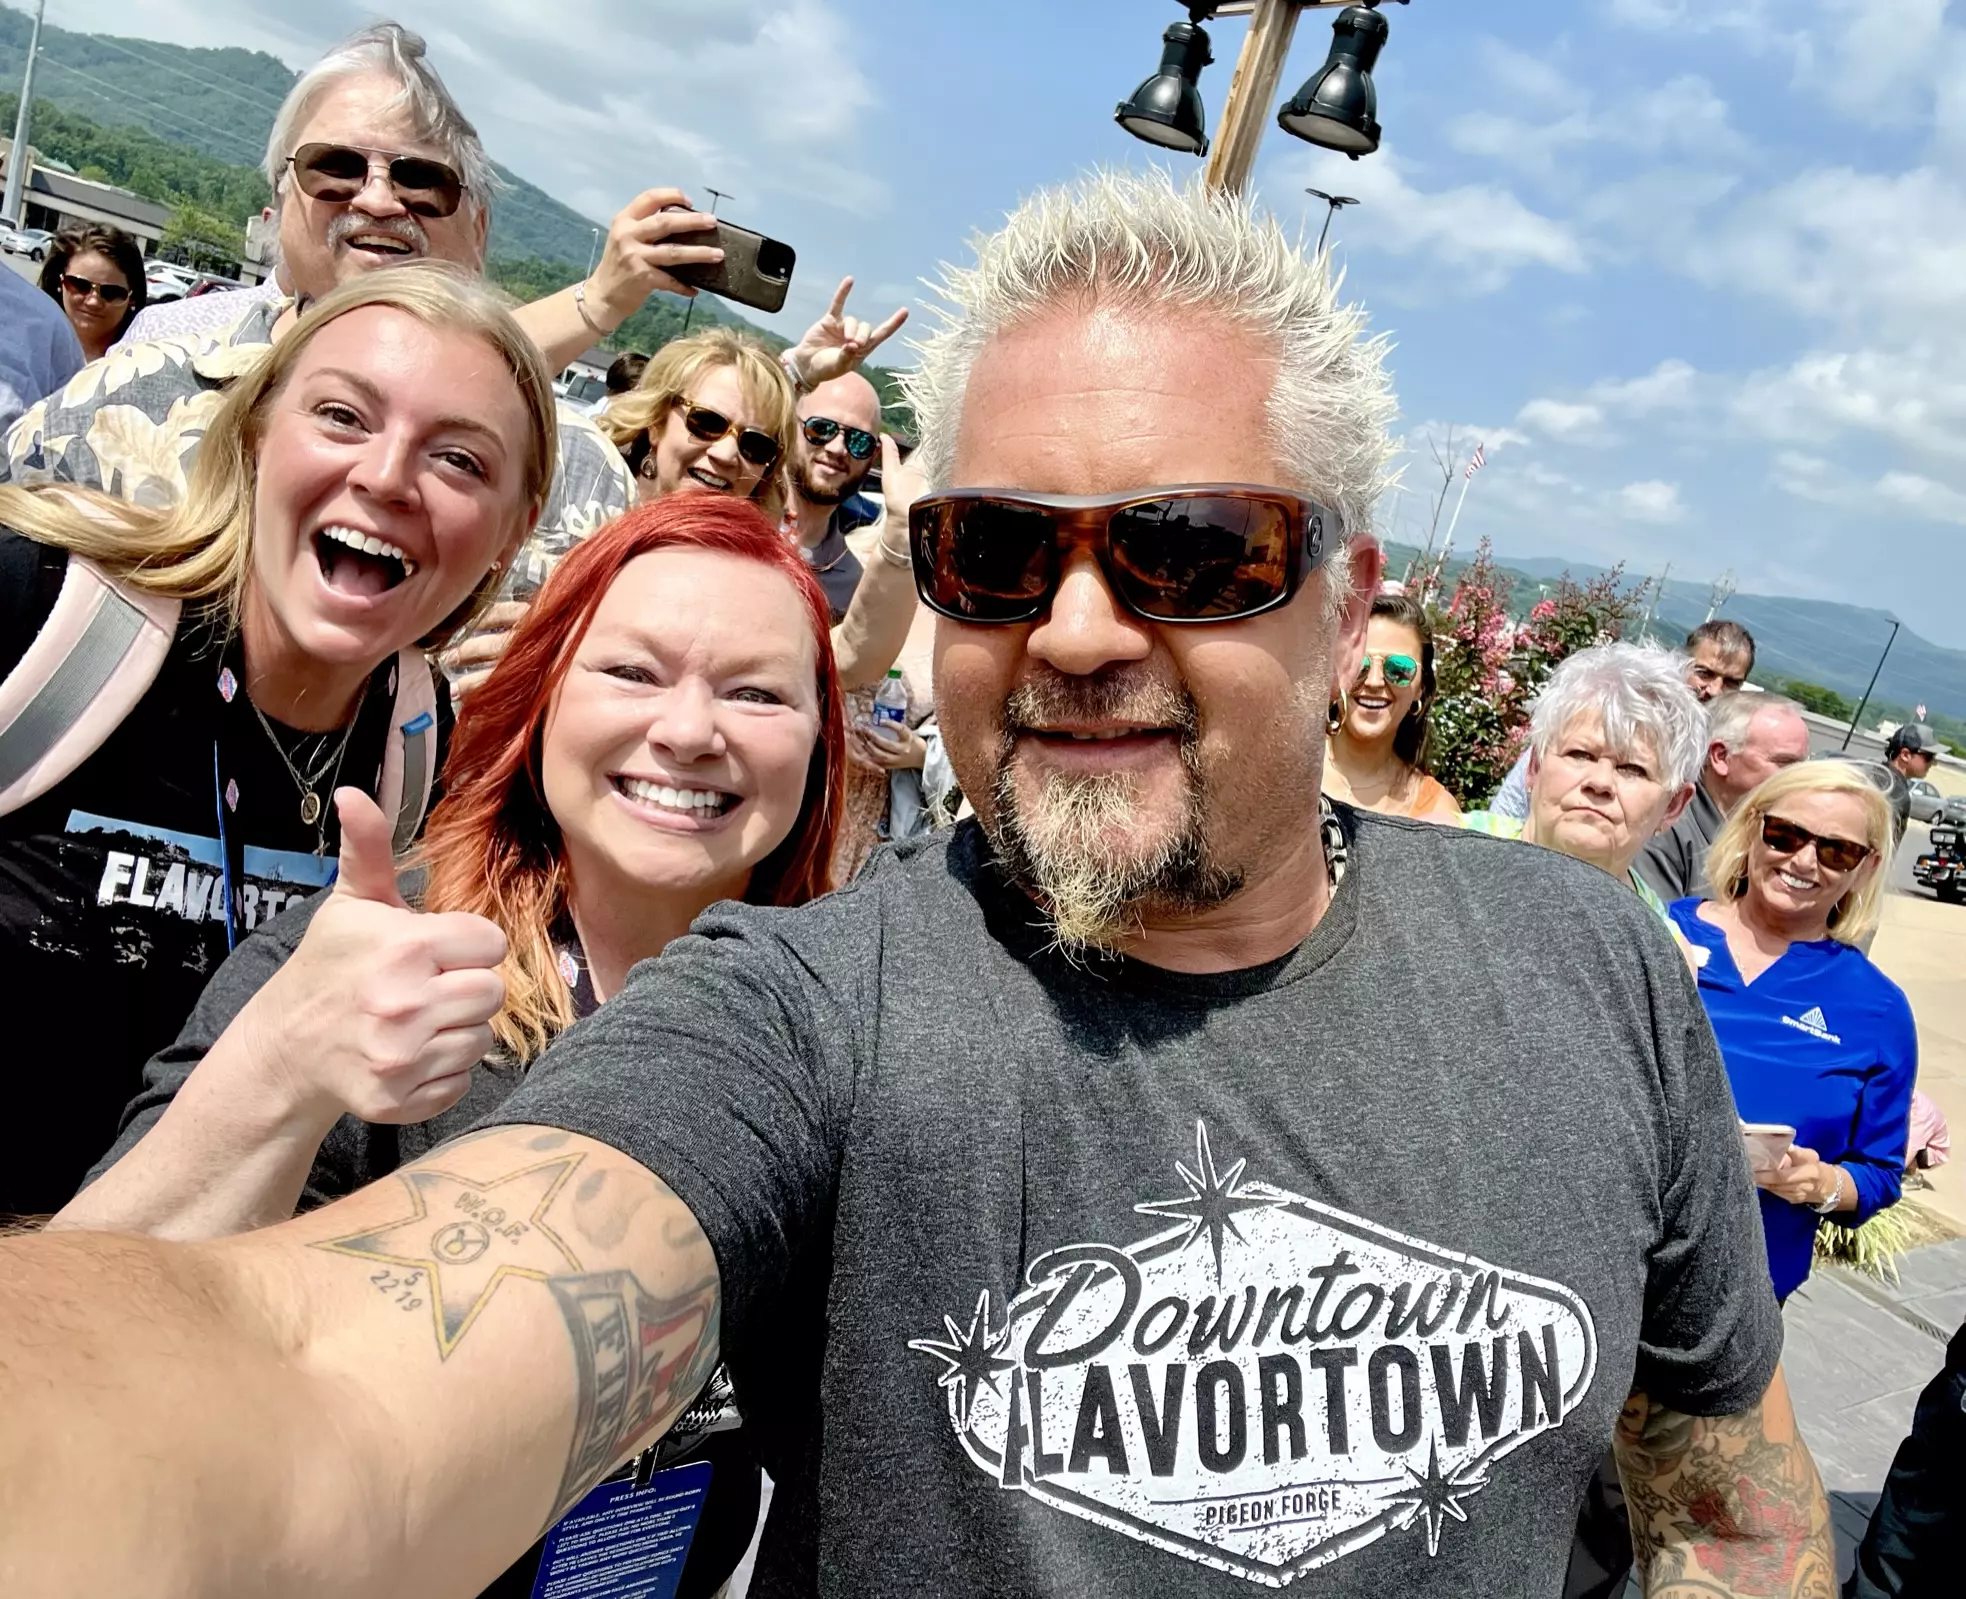 Guy Fieri NFL shirts are here. And AZ Cardinals gear raises eyebrows